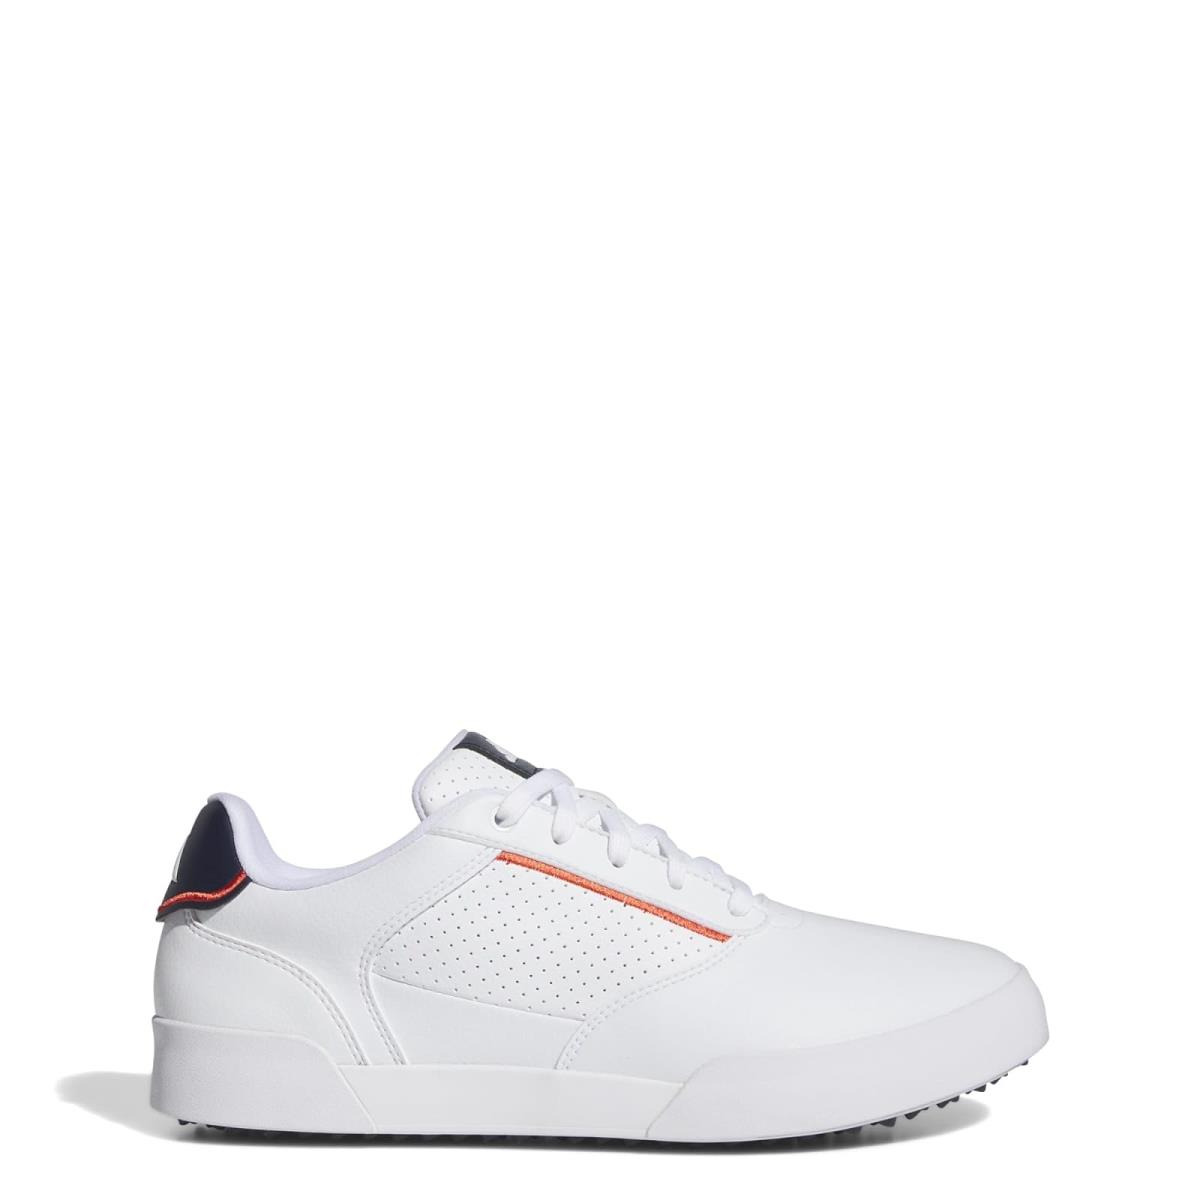 Man`s Sneakers Athletic Shoes Adidas Golf Retrocross Spikeless Golf Shoes Footwear White/Footwear White/Collegiate Navy